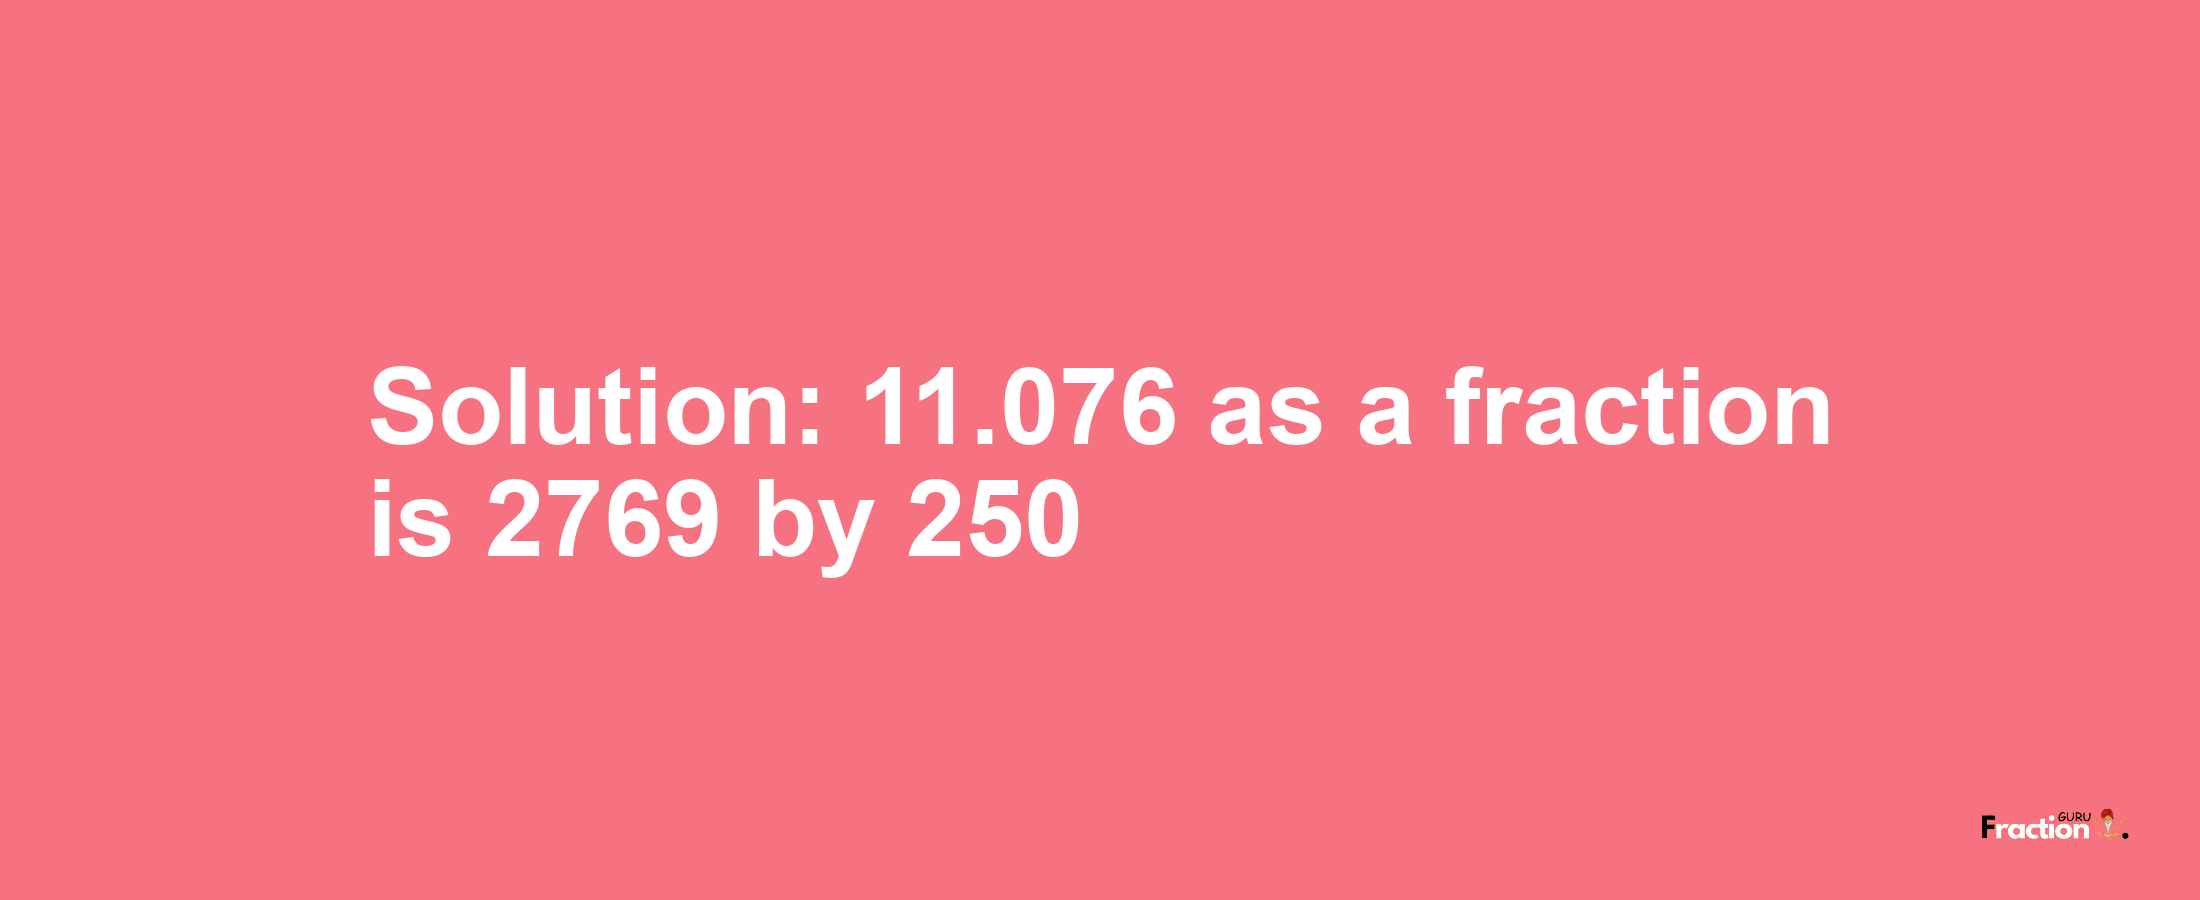 Solution:11.076 as a fraction is 2769/250